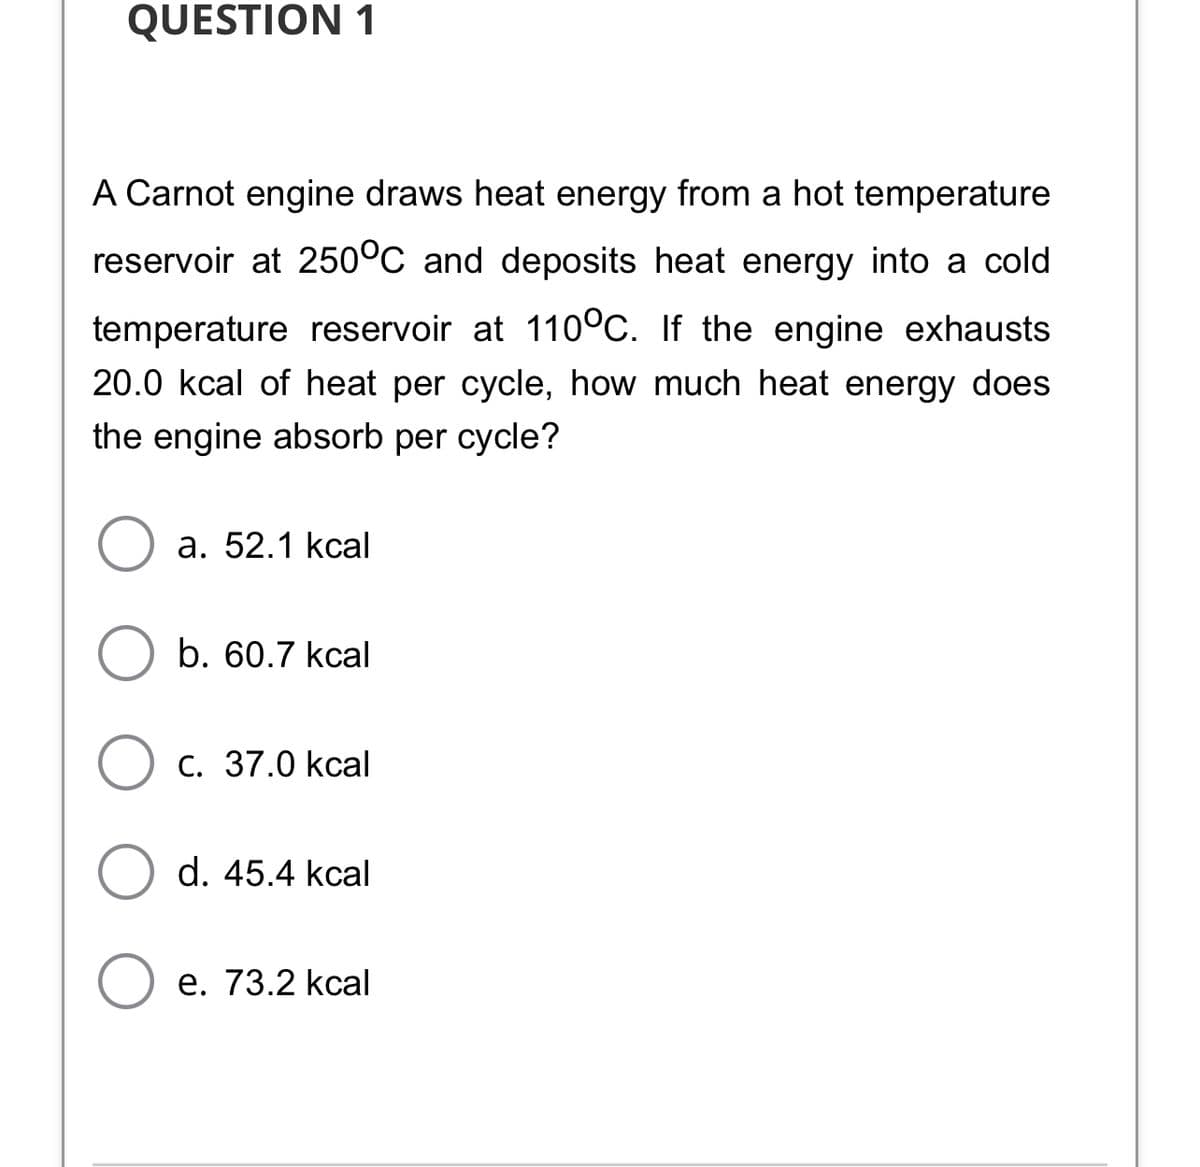 QUESTION 1
A Carnot engine draws heat energy from a hot temperature
reservoir at 250°C and deposits heat energy into a cold
temperature reservoir at 110°C. If the engine exhausts
20.0 kcal of heat per cycle, how much heat energy does
the engine absorb per cycle?
а. 52.1 kcal
b. 60.7 kcal
O c. 37.0 kcal
d. 45.4 kcal
е. 73.2 kcal
